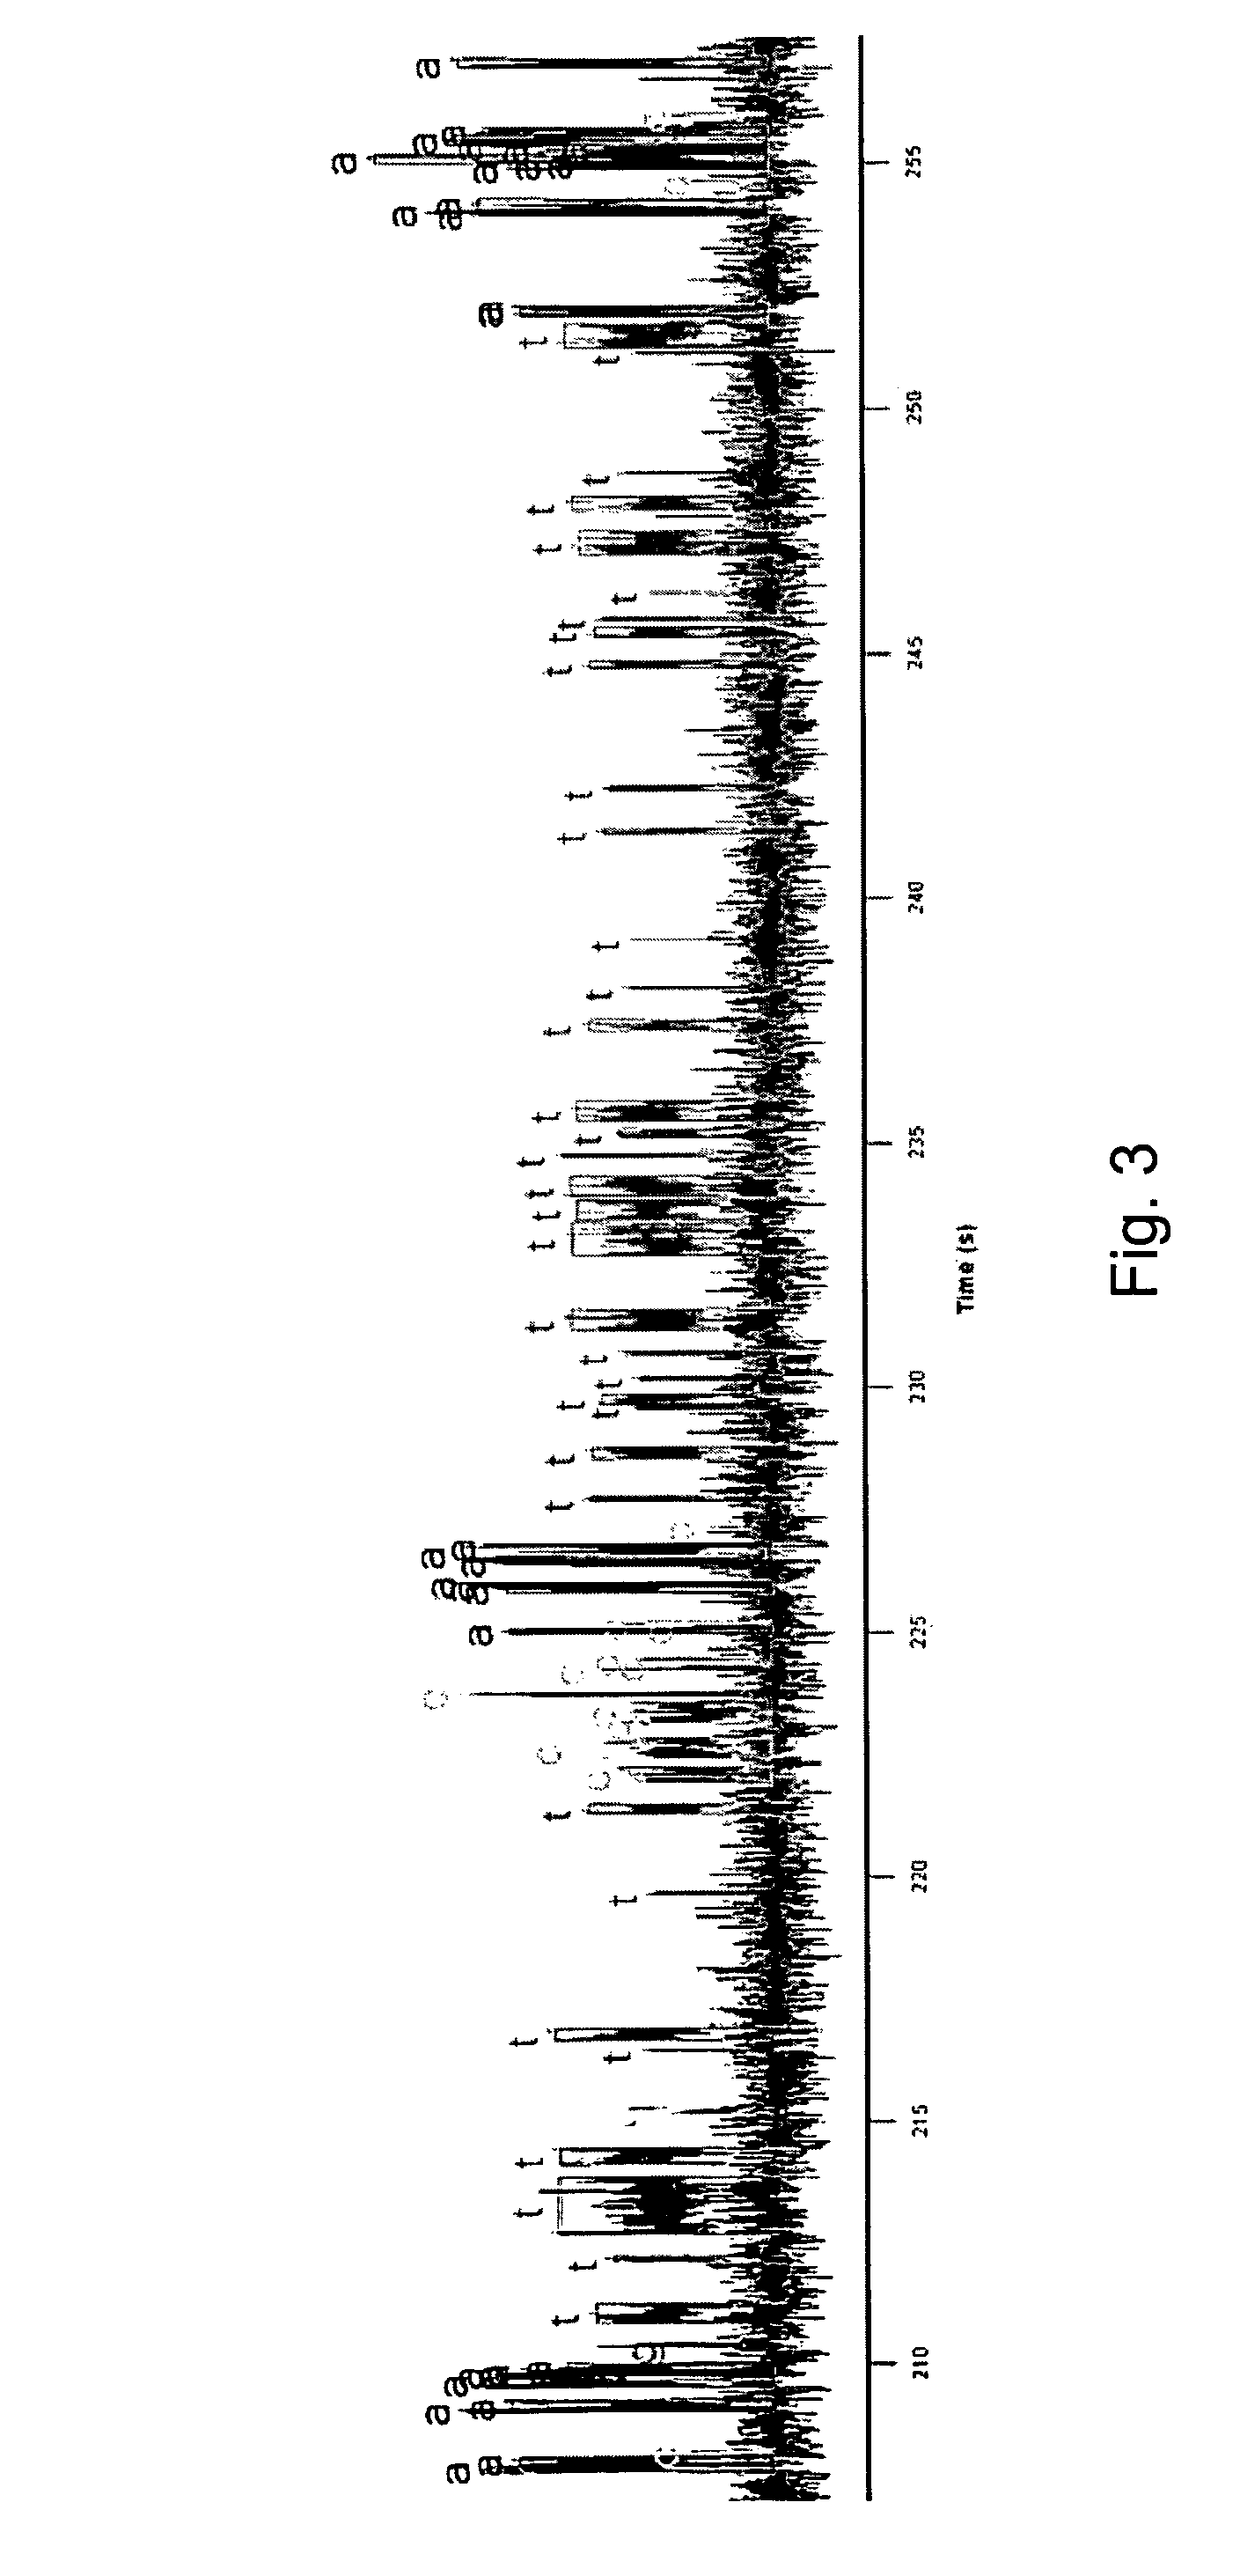 Method for sequencing using branching fraction of incorporatable nucleotides